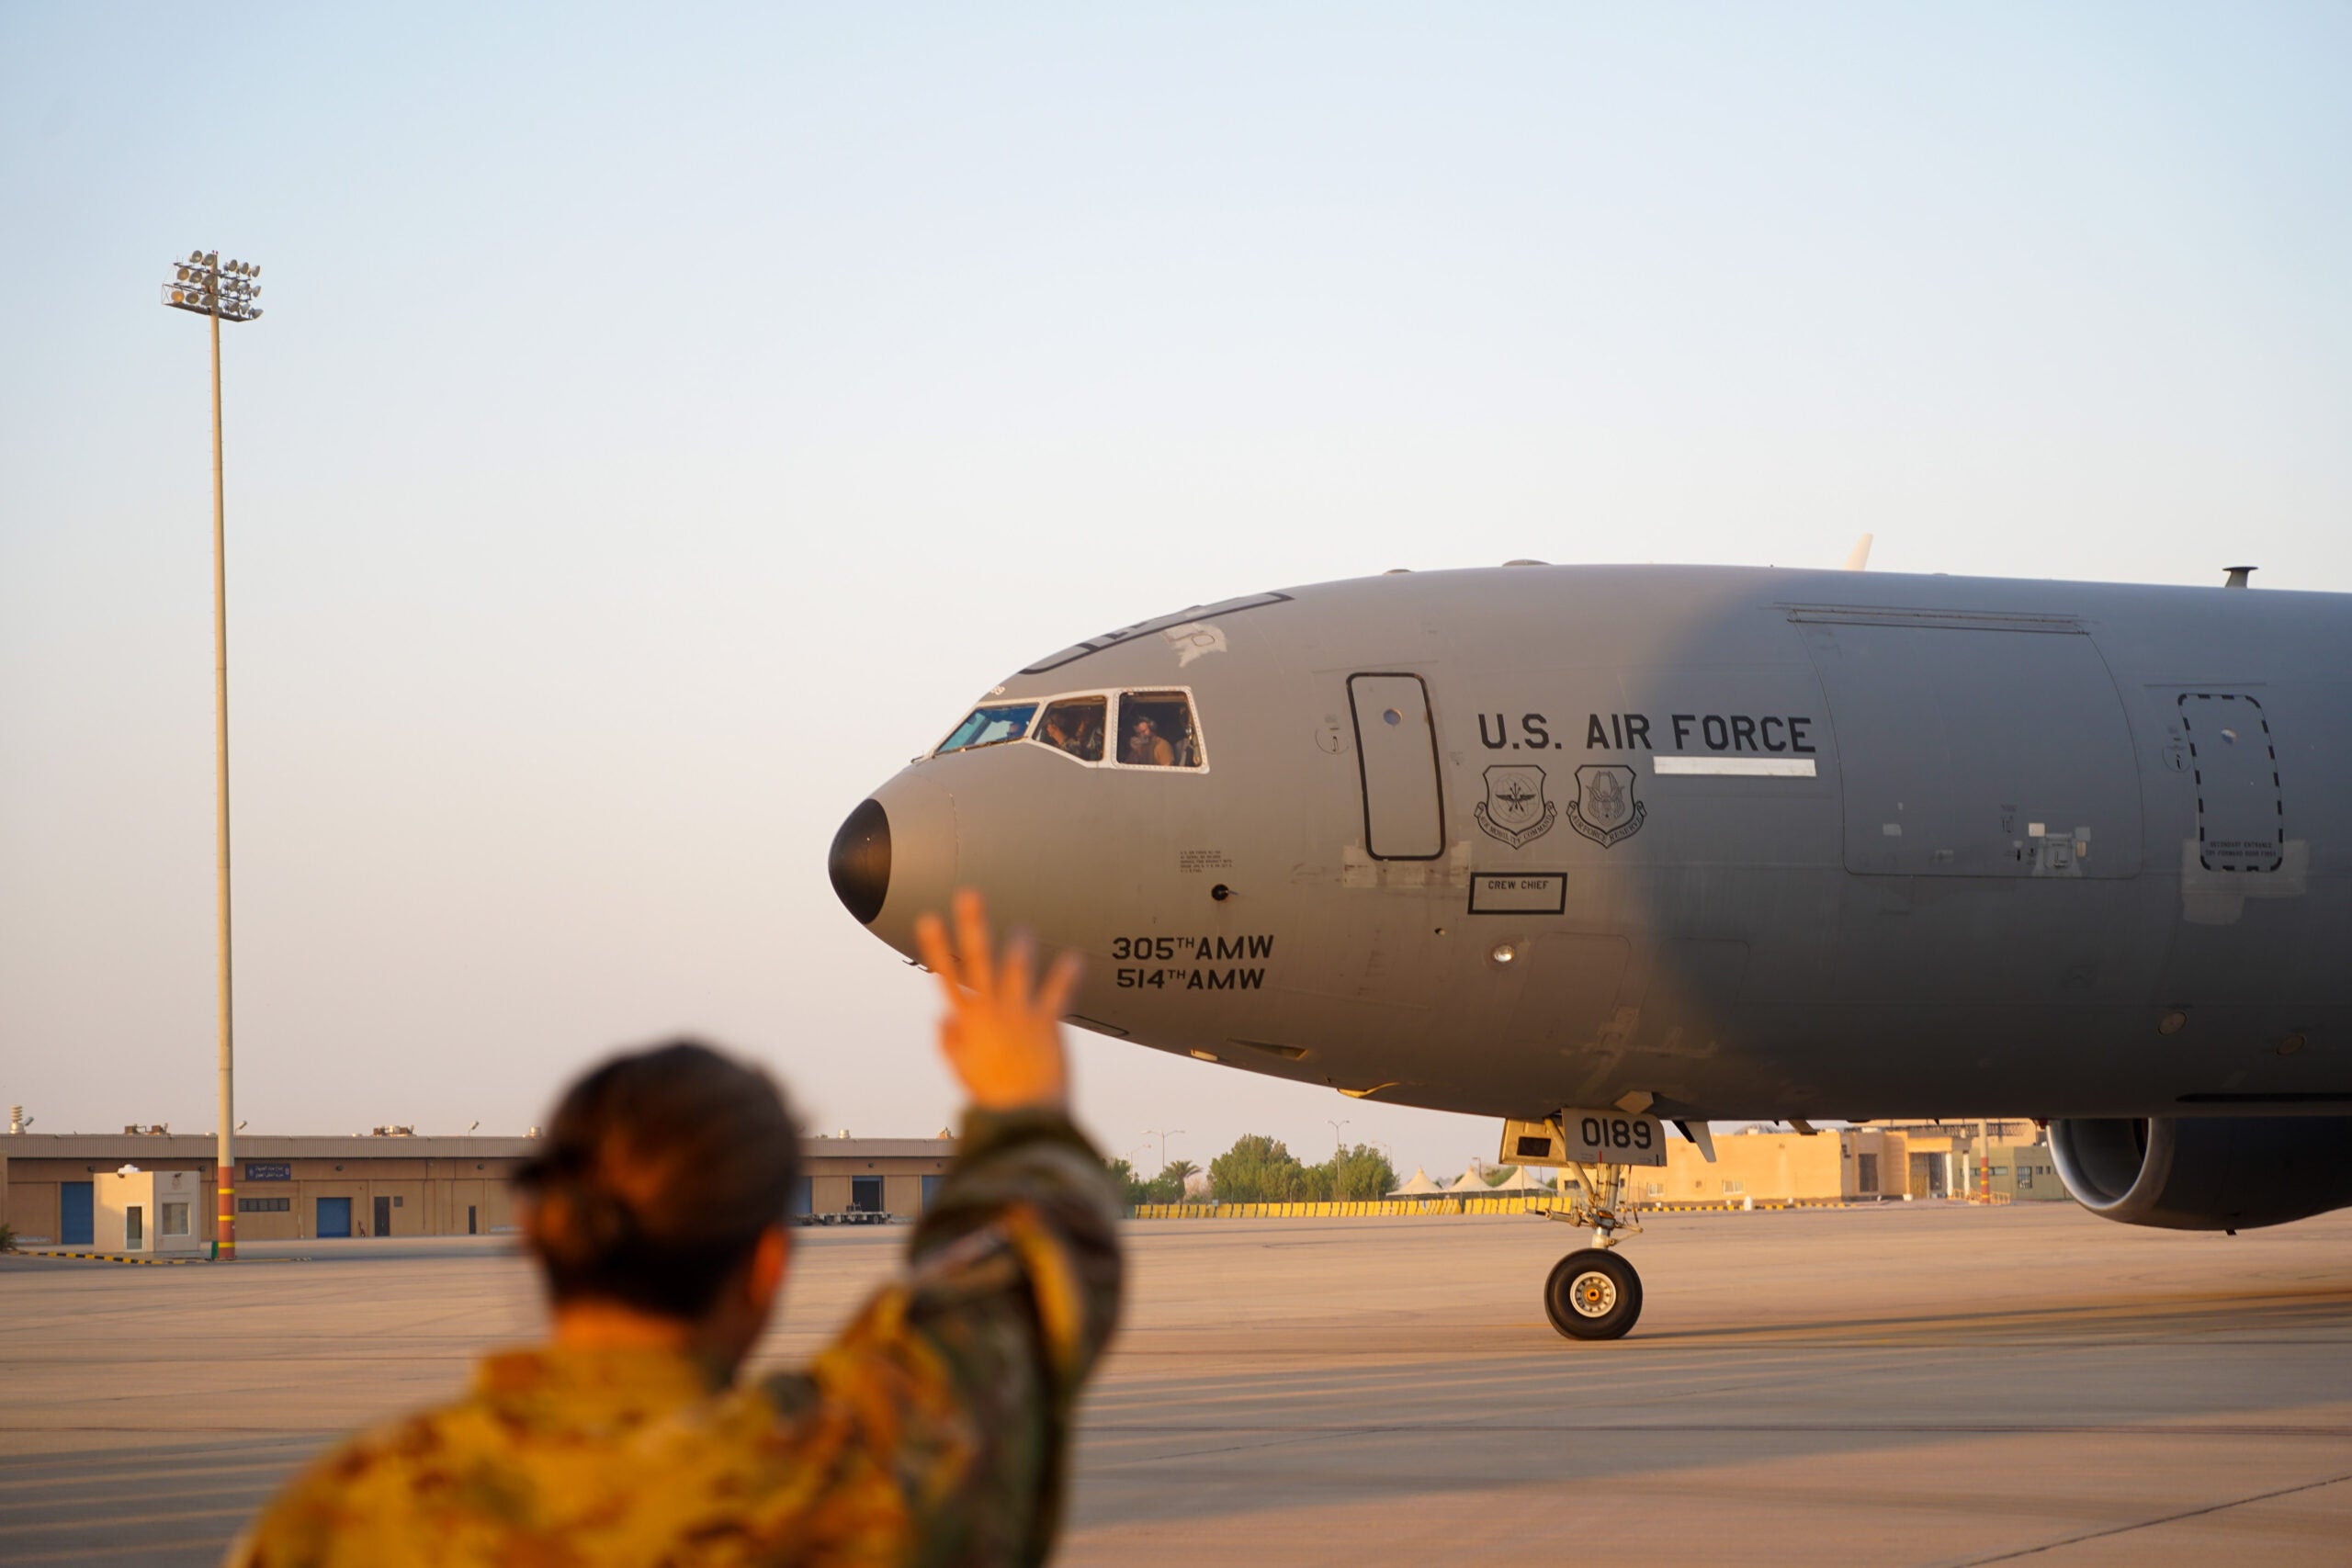 A U.S. Airman waves to a KC-10 as it departs after conducting the airframe's final combat deployment at Prince Sultan Air Base (PSAB), Kingdom of Saudi Arabia, Oct. 5, 2023. The departure of the KC-10 at PSAB marked the end of the airframe's over 30 years of service within the U.S. Air Forces Central (AFCENT) Area of Responsibility. By September 2024, the U.S. Air Force's fleet of KC-10s will be decommissioned and gradually replaced by the KC-46 aircraft. (U.S. Air Force photo by Tech. Sgt. Alexander Frank)